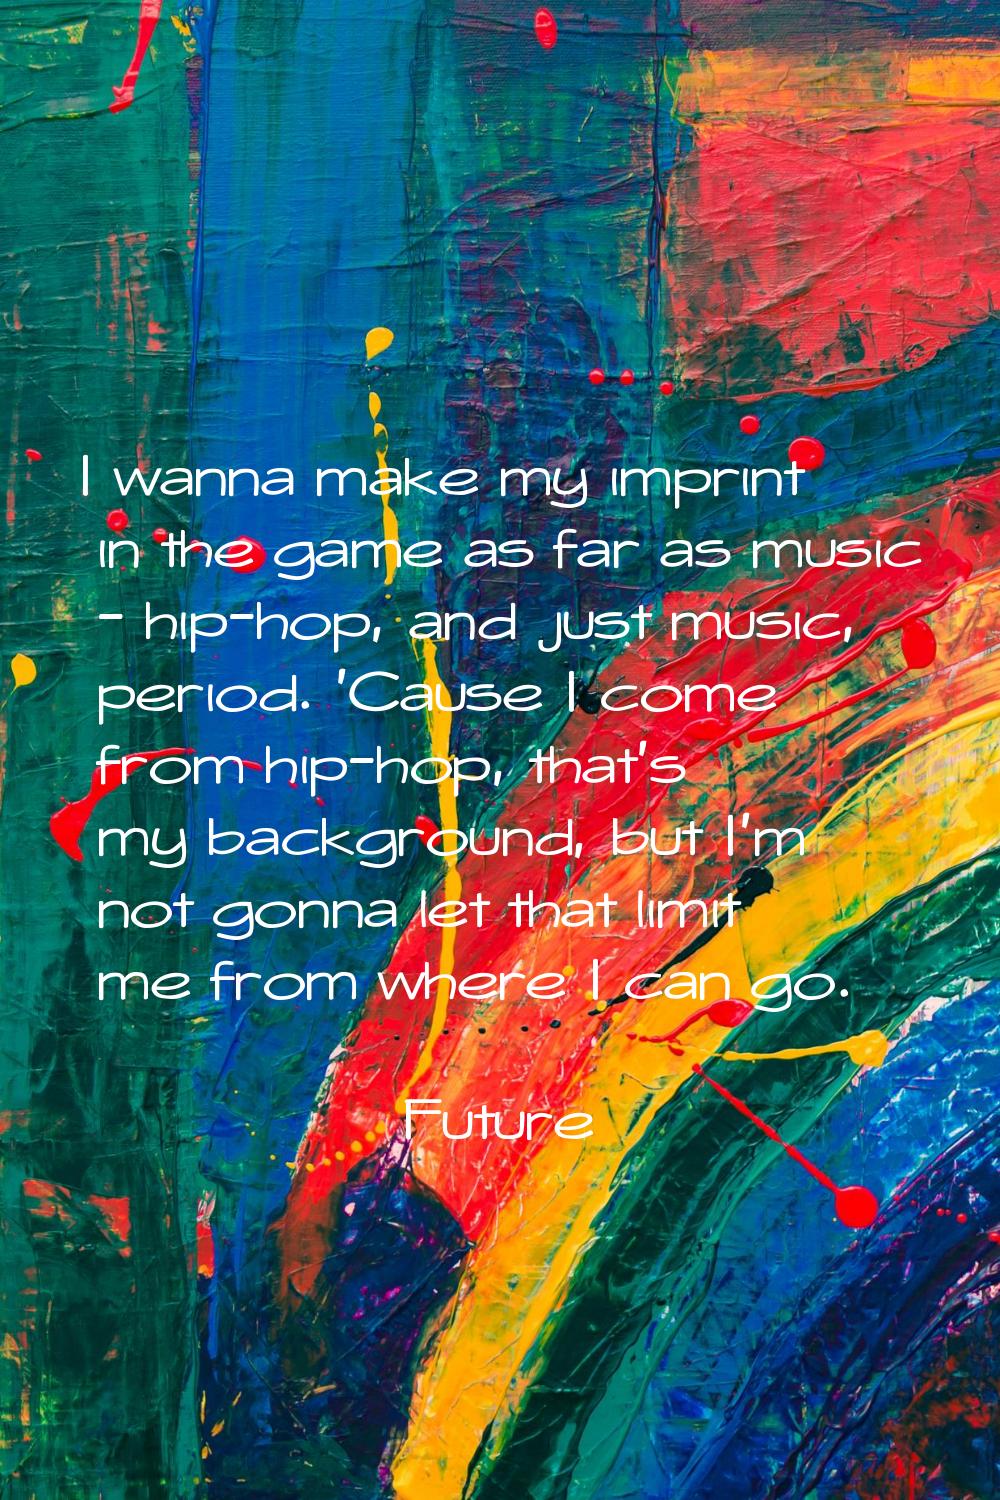 I wanna make my imprint in the game as far as music - hip-hop, and just music, period. 'Cause I com